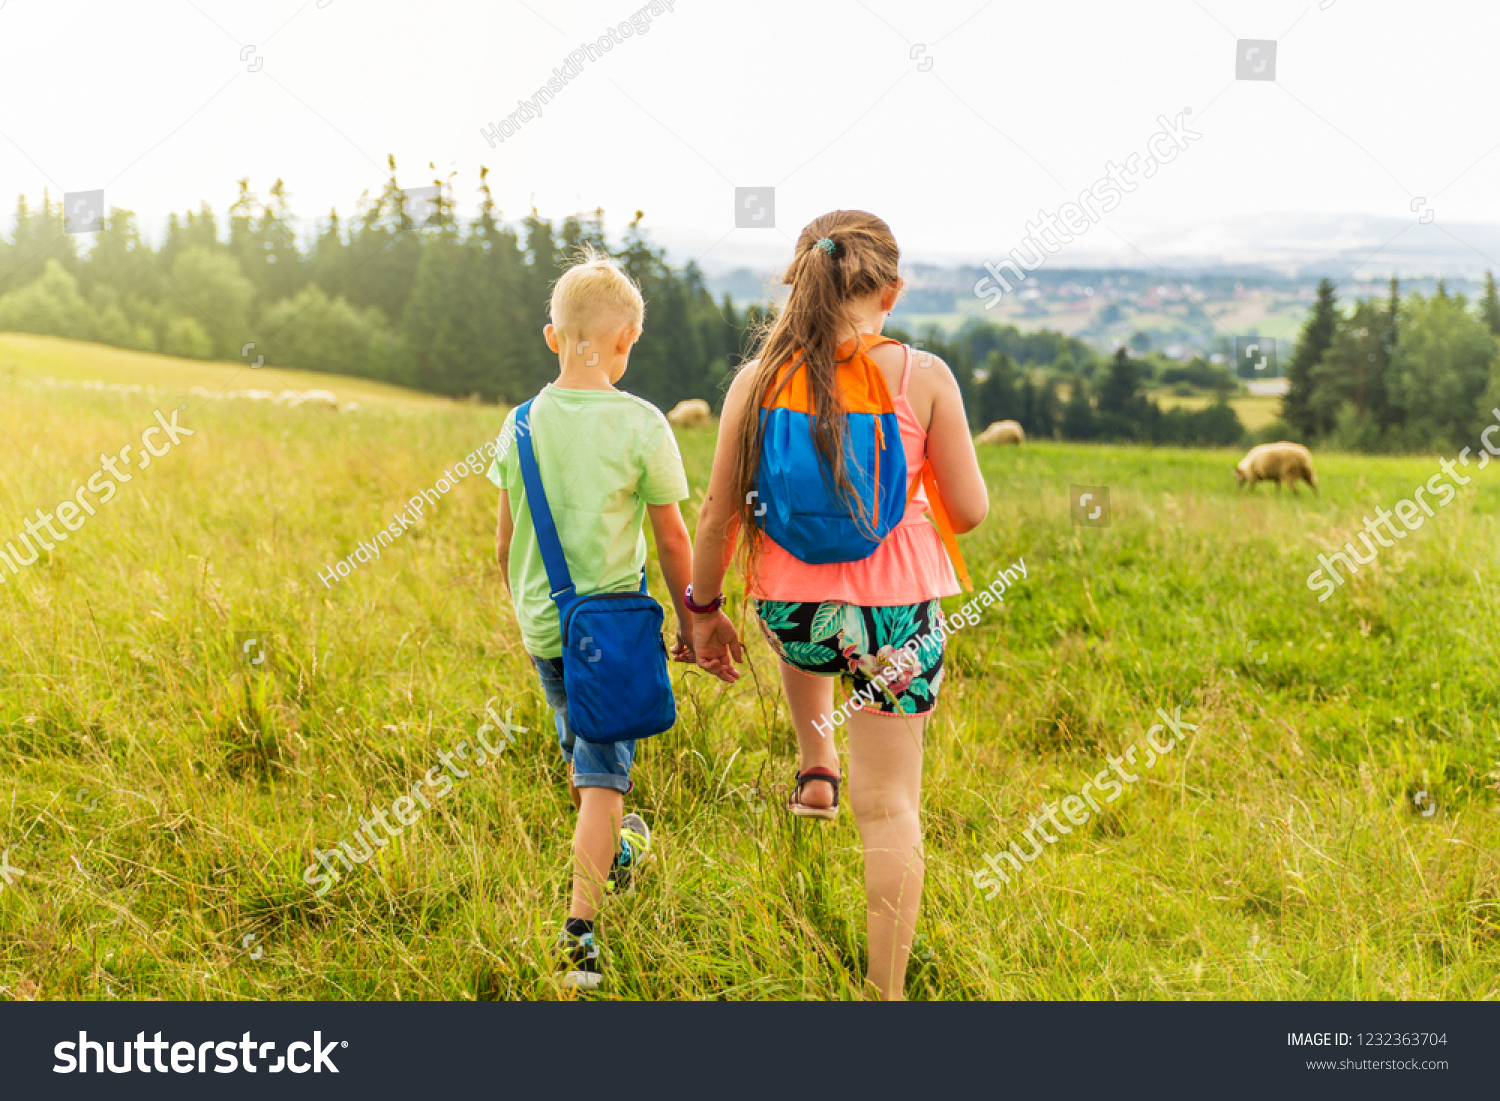 Children are walking around the park and meadow #1232363704